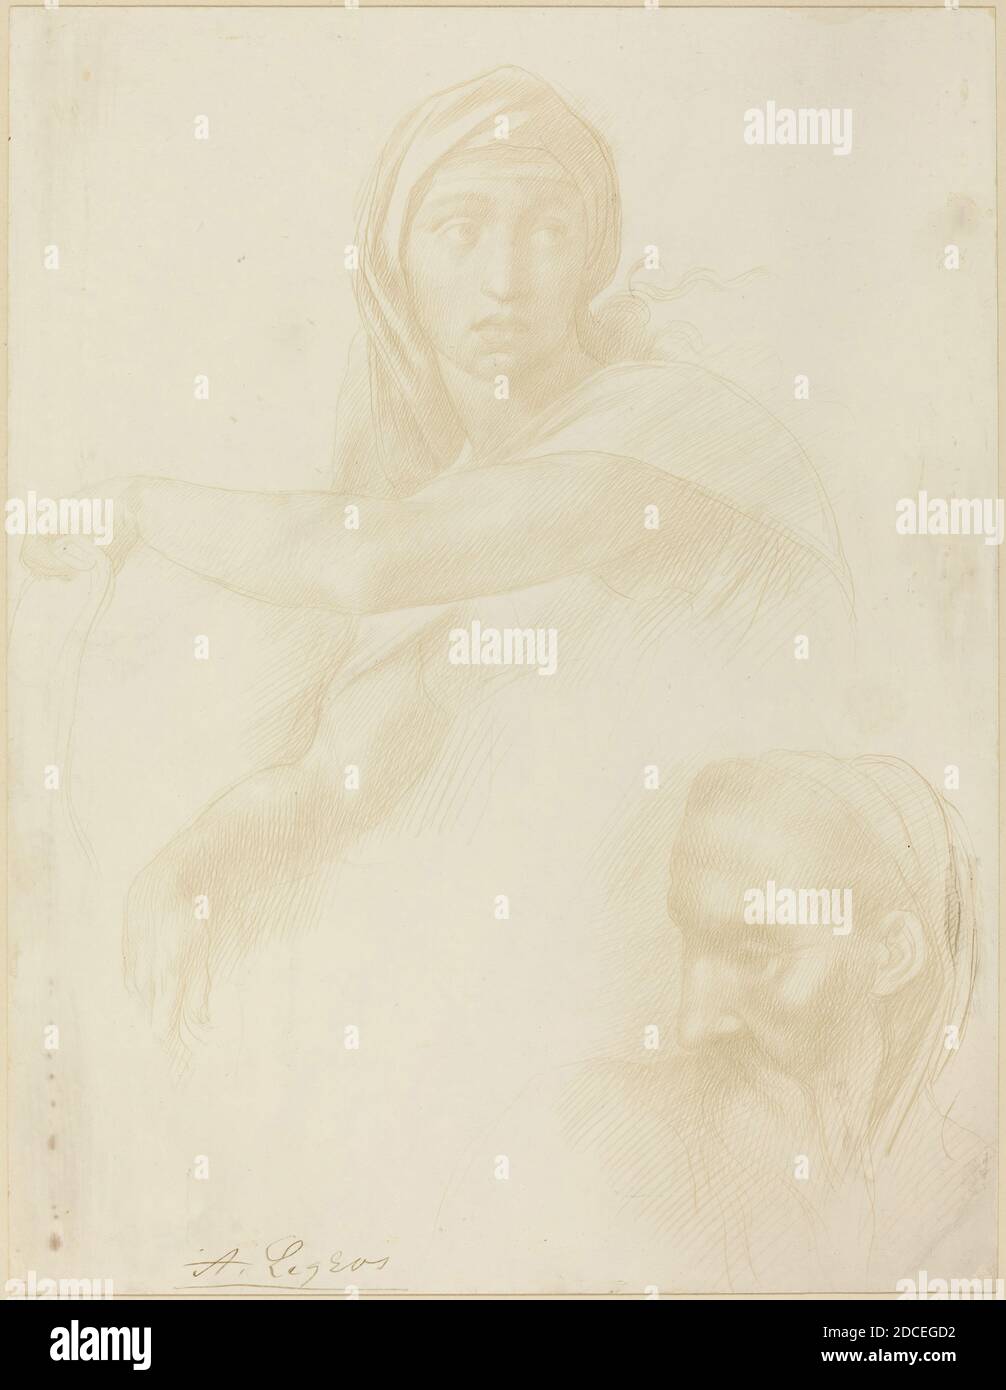 Alphonse Legros, (artist), French, 1837 - 1911, Michelangelo, (artist after), Florentine, 1475 - 1564, Study of Delphic Sibyl; Head of a Man, silverpoint on prepared paper, overall: 30 x 23.1 cm (11 13/16 x 9 1/8 in Stock Photo